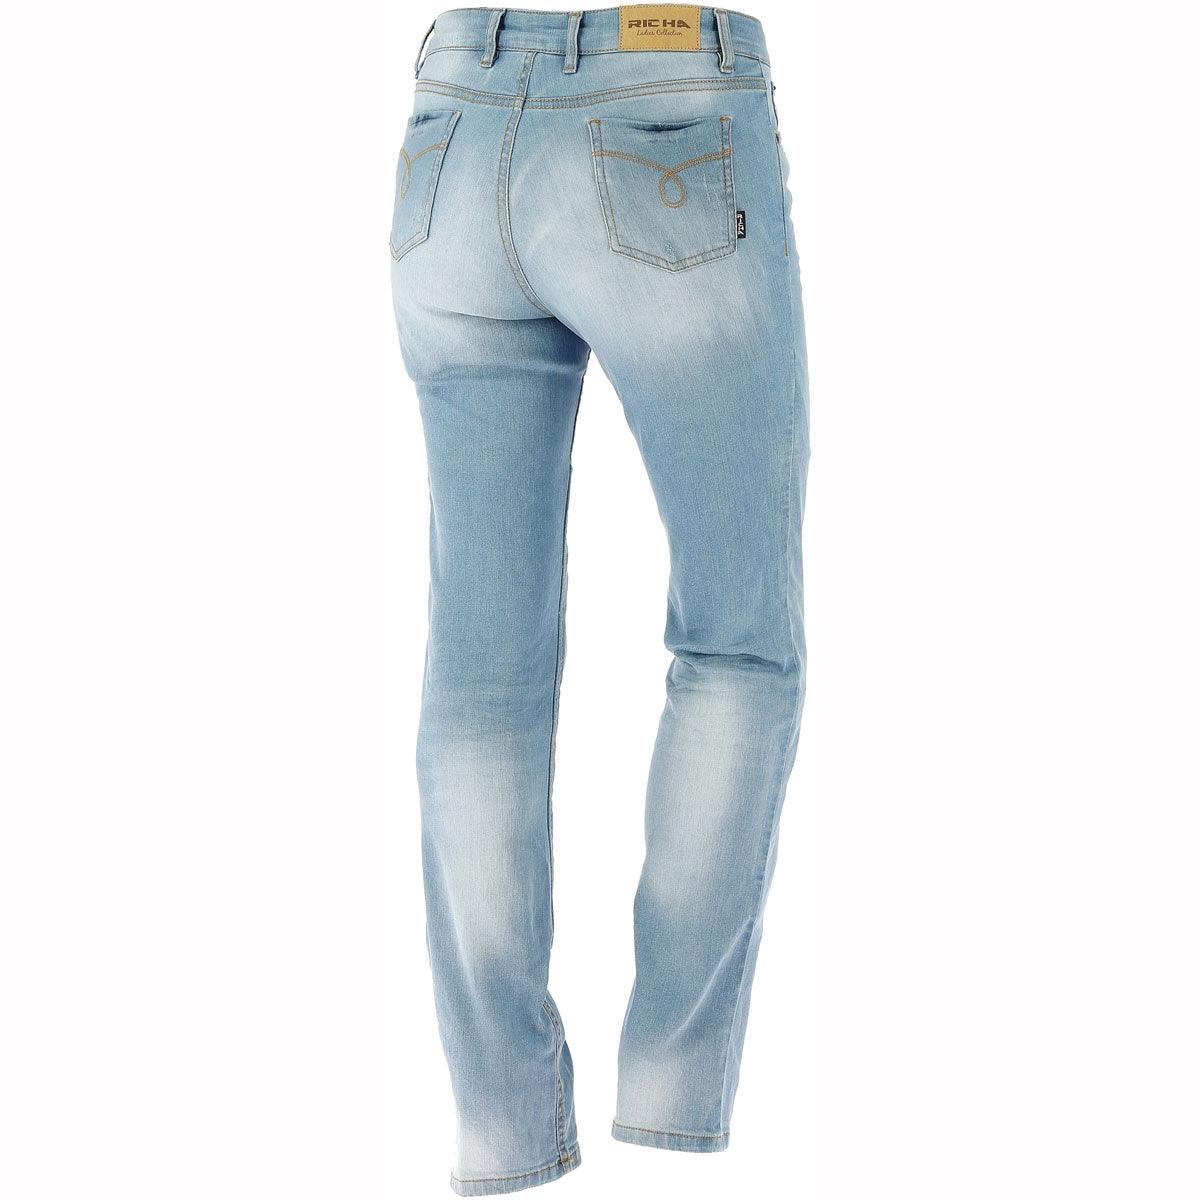 Richa Nora Jeans Ladies 32in Leg Blue - Armoured Jeans